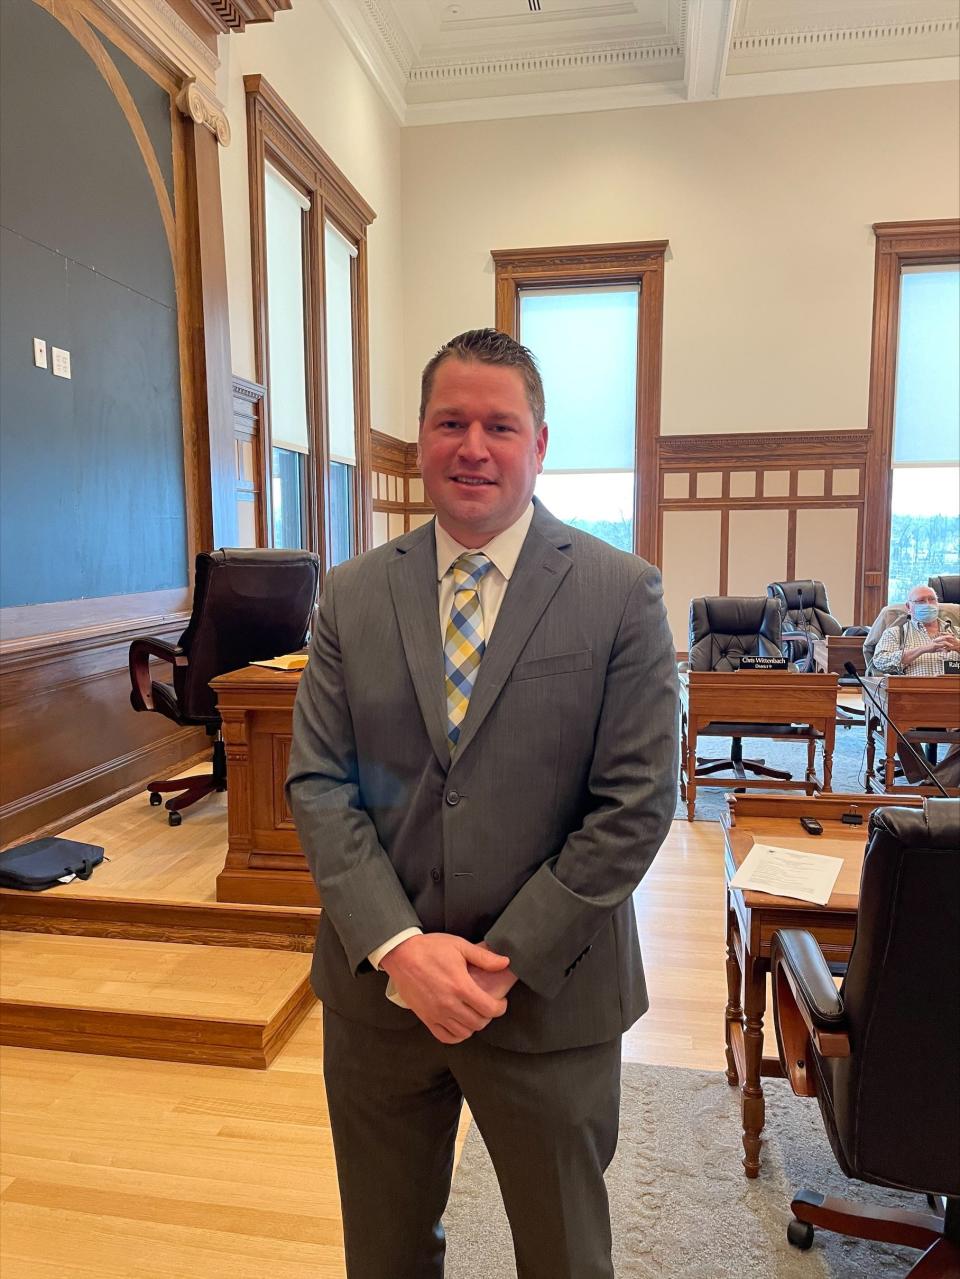 Lenawee County Commissioner Dustin Krasny, R-Cambridge Twp., was elected vice chair of the board Friday during the board's organizational meeting.